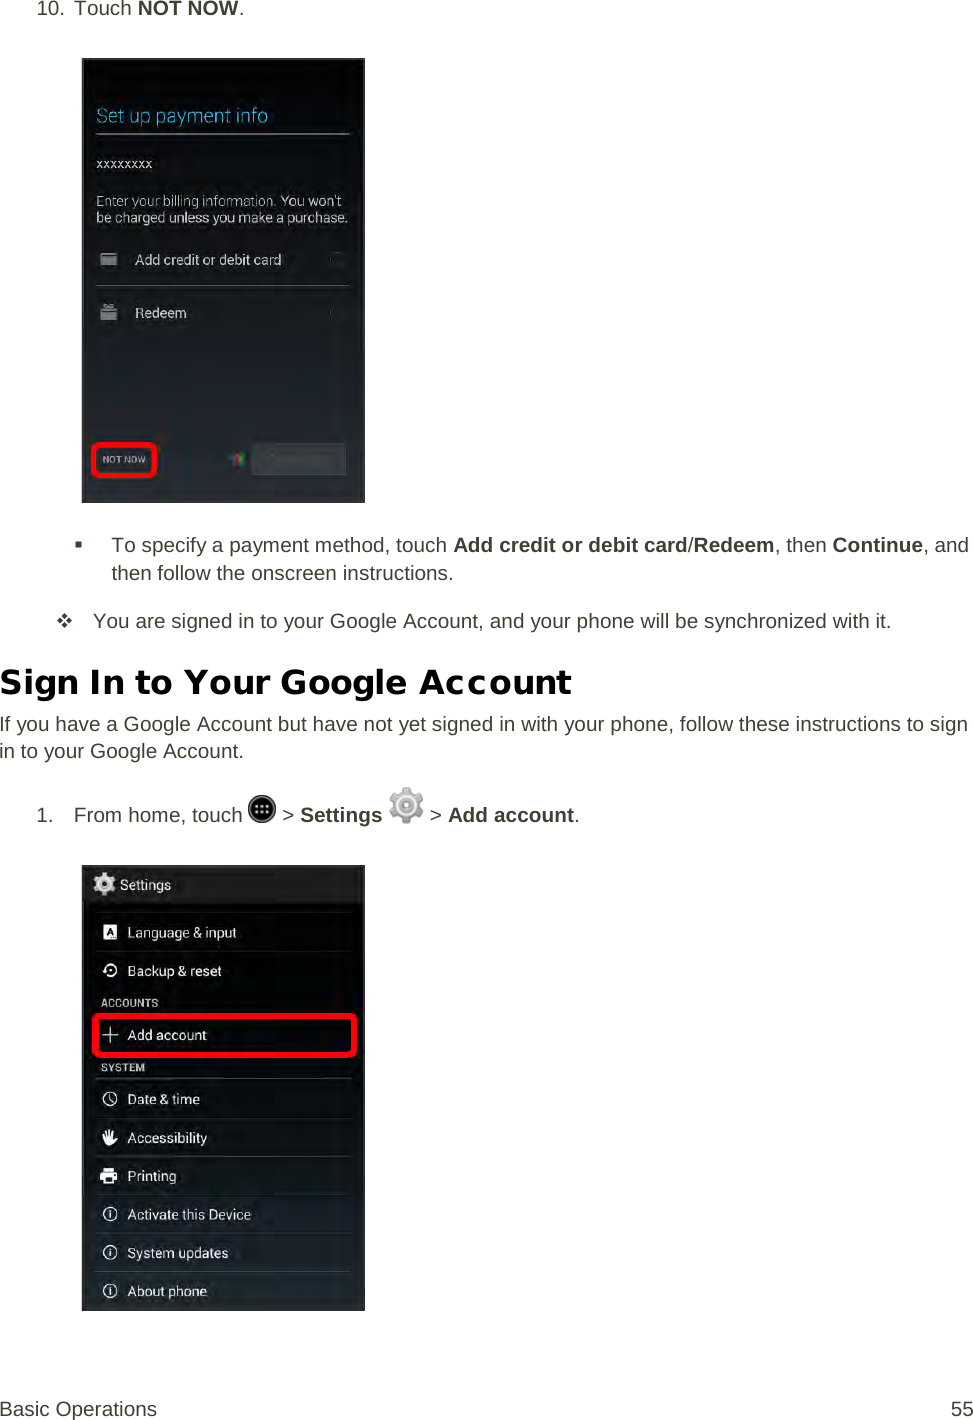 10. Touch NOT NOW.    To specify a payment method, touch Add credit or debit card/Redeem, then Continue, and then follow the onscreen instructions.  You are signed in to your Google Account, and your phone will be synchronized with it. Sign In to Your Google Account If you have a Google Account but have not yet signed in with your phone, follow these instructions to sign in to your Google Account. 1.  From home, touch   &gt; Settings   &gt; Add account.   Basic Operations 55 